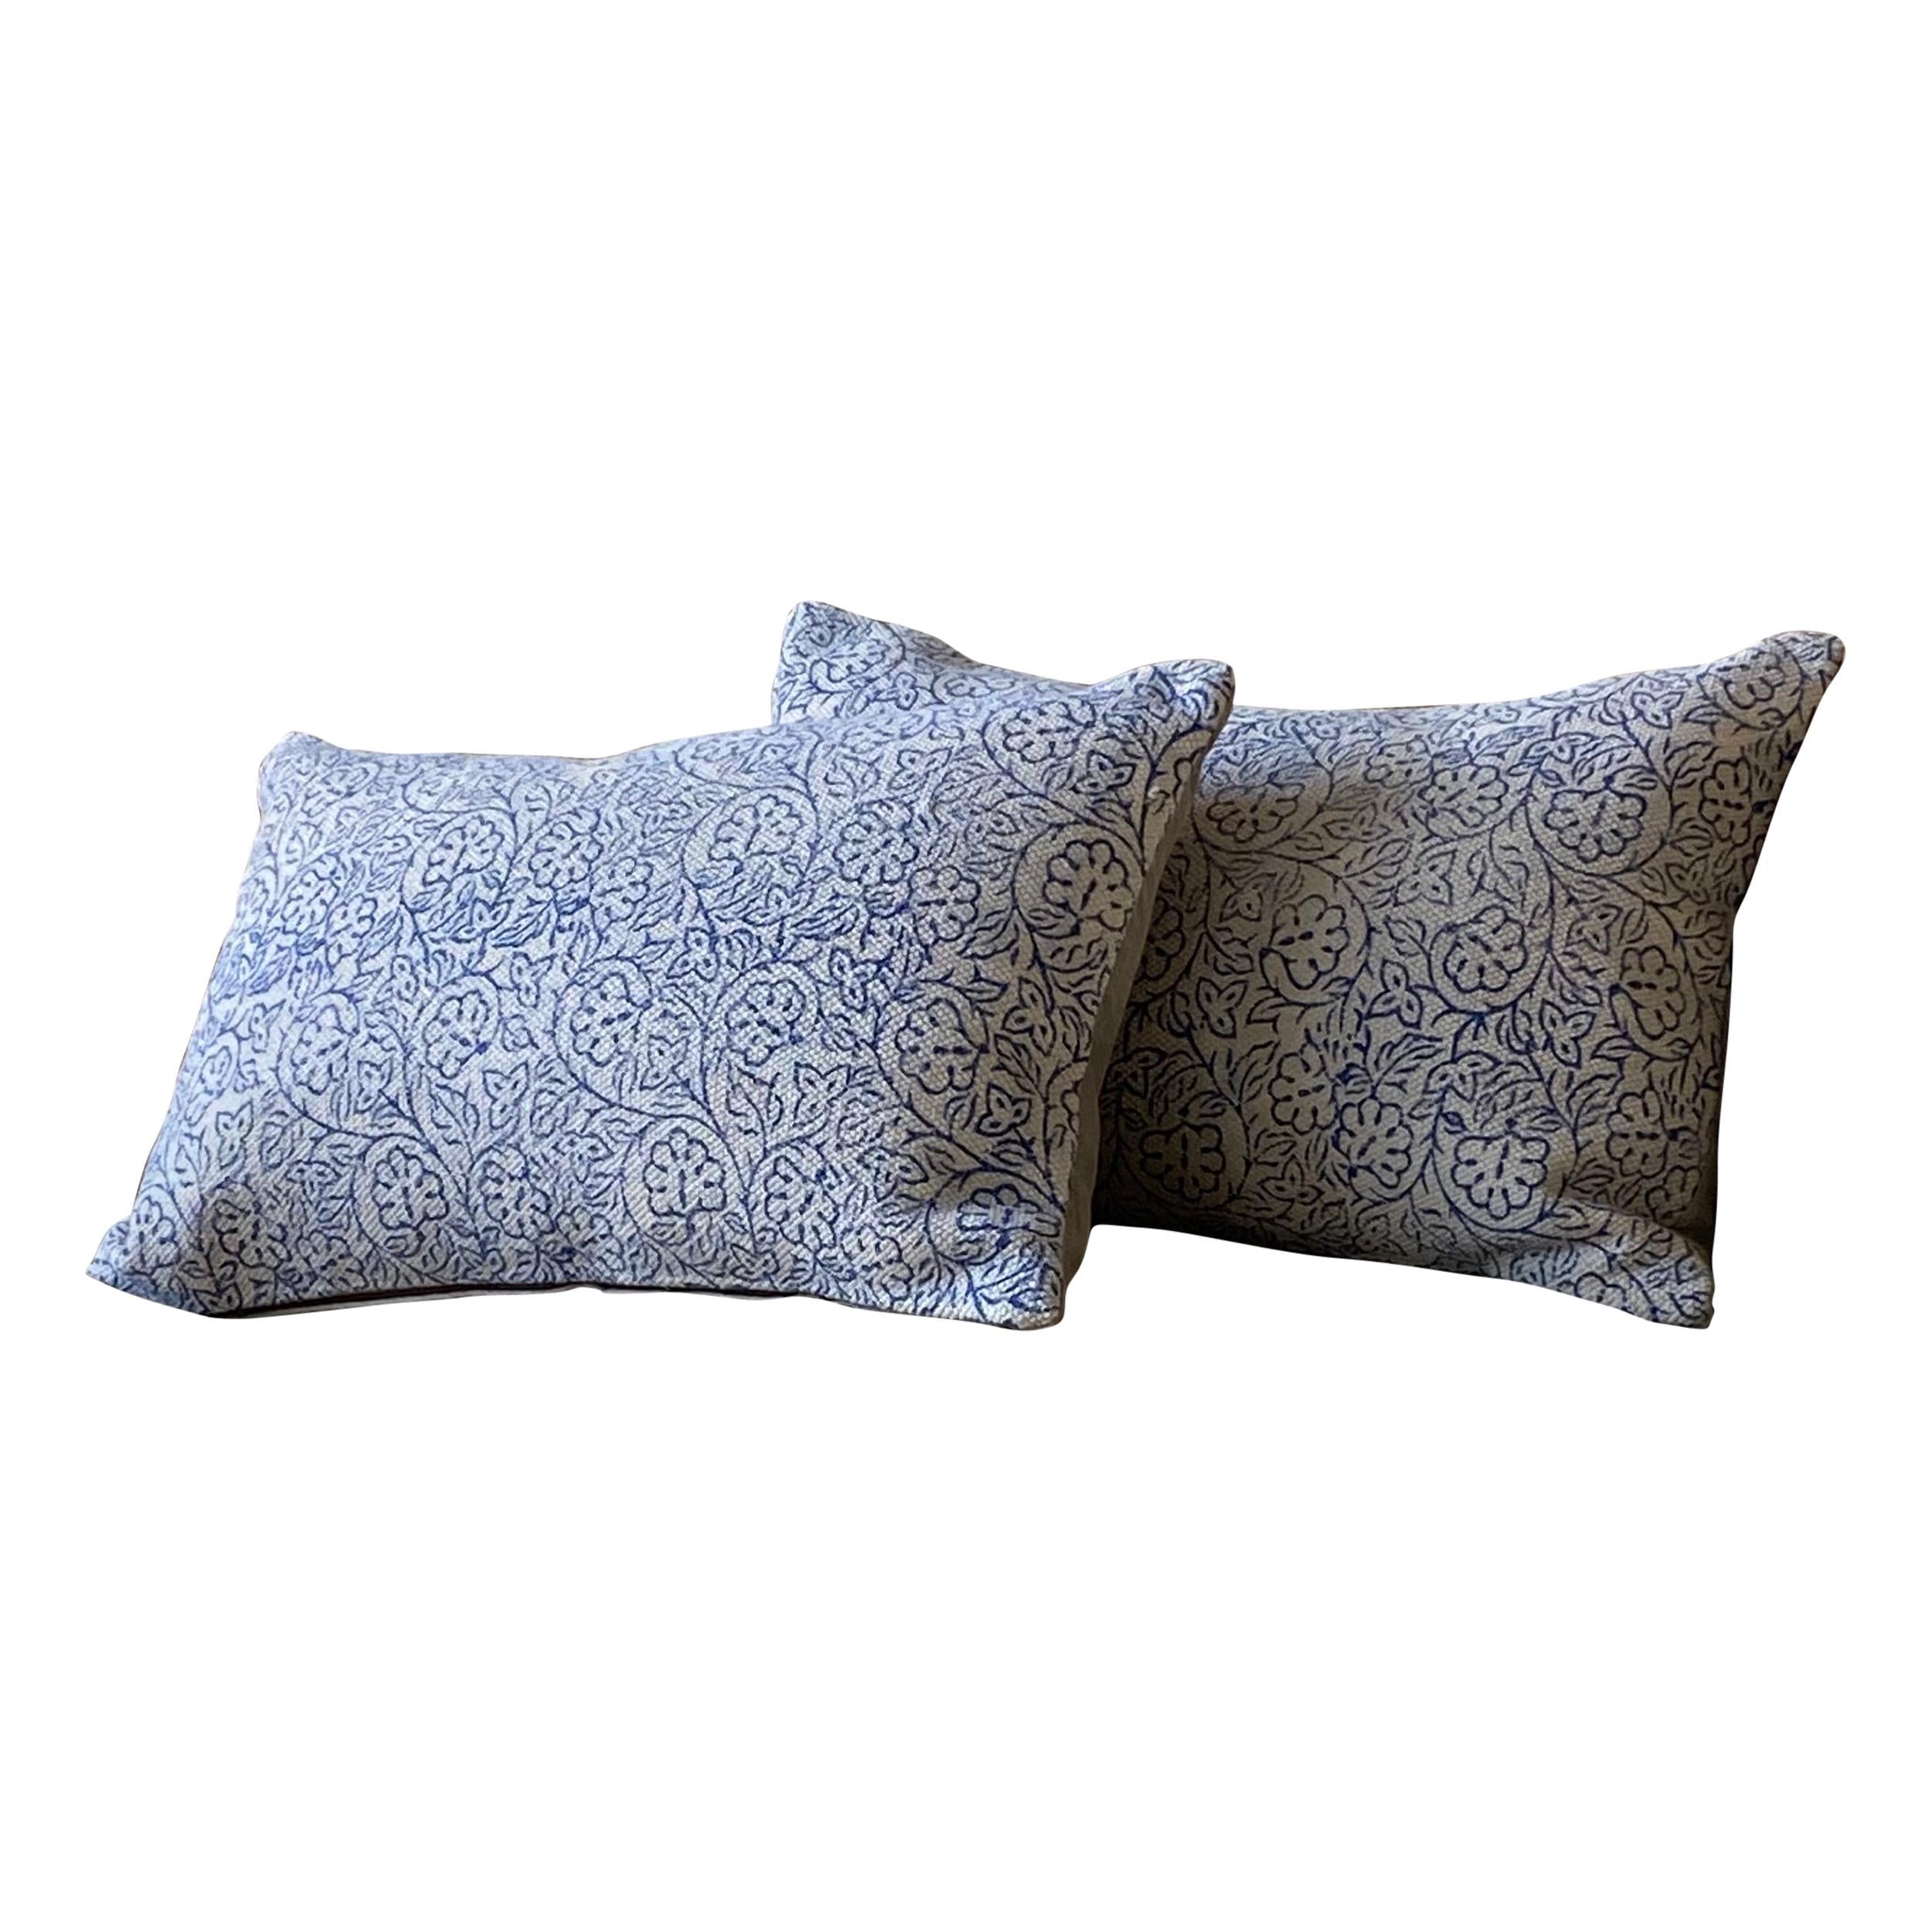 Heavy Cream and Blue Floral Linen Pillow